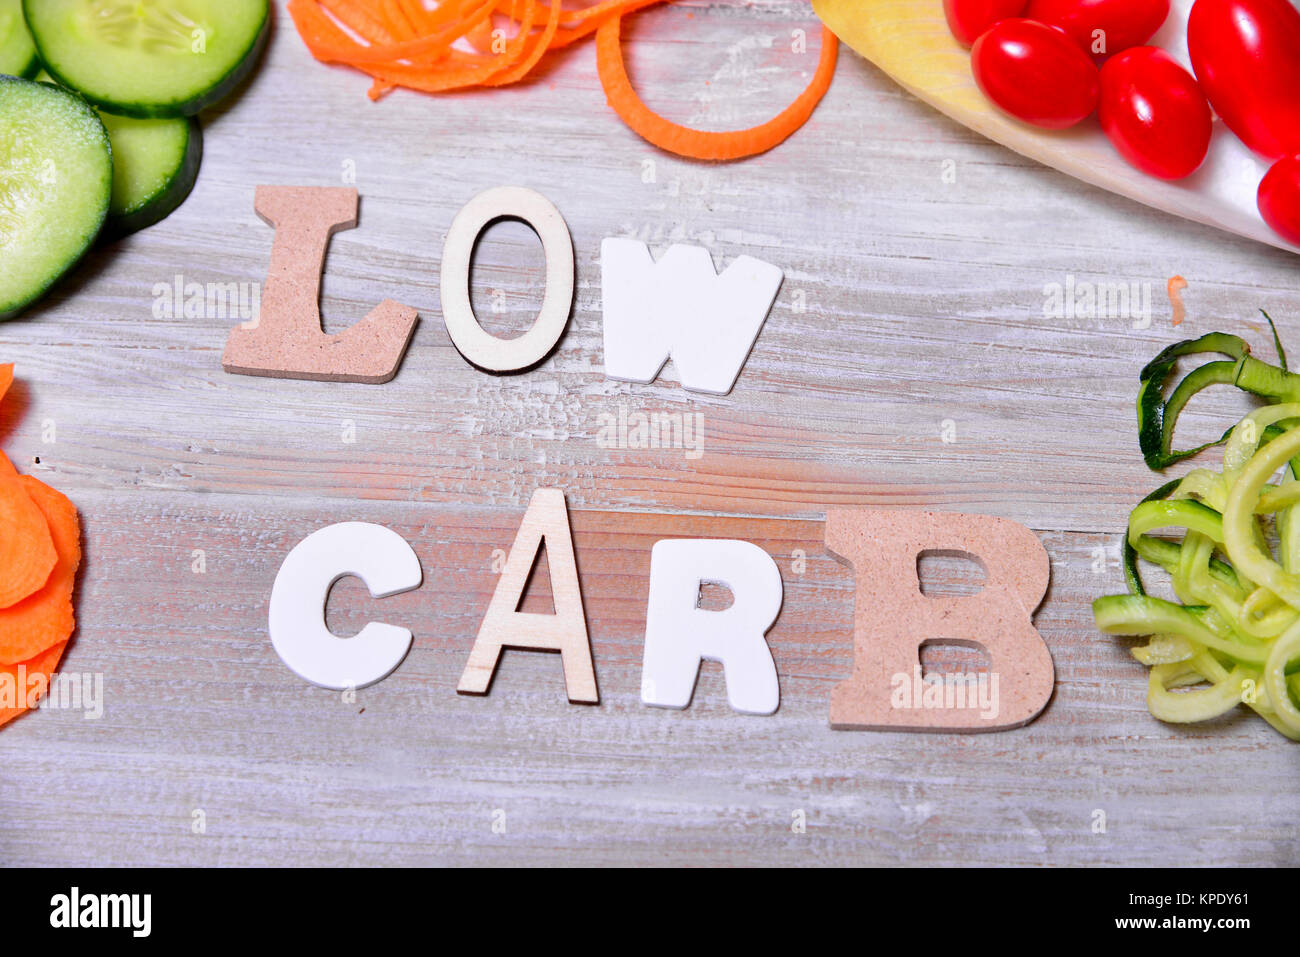 low carb vegetable letter text Stock Photo